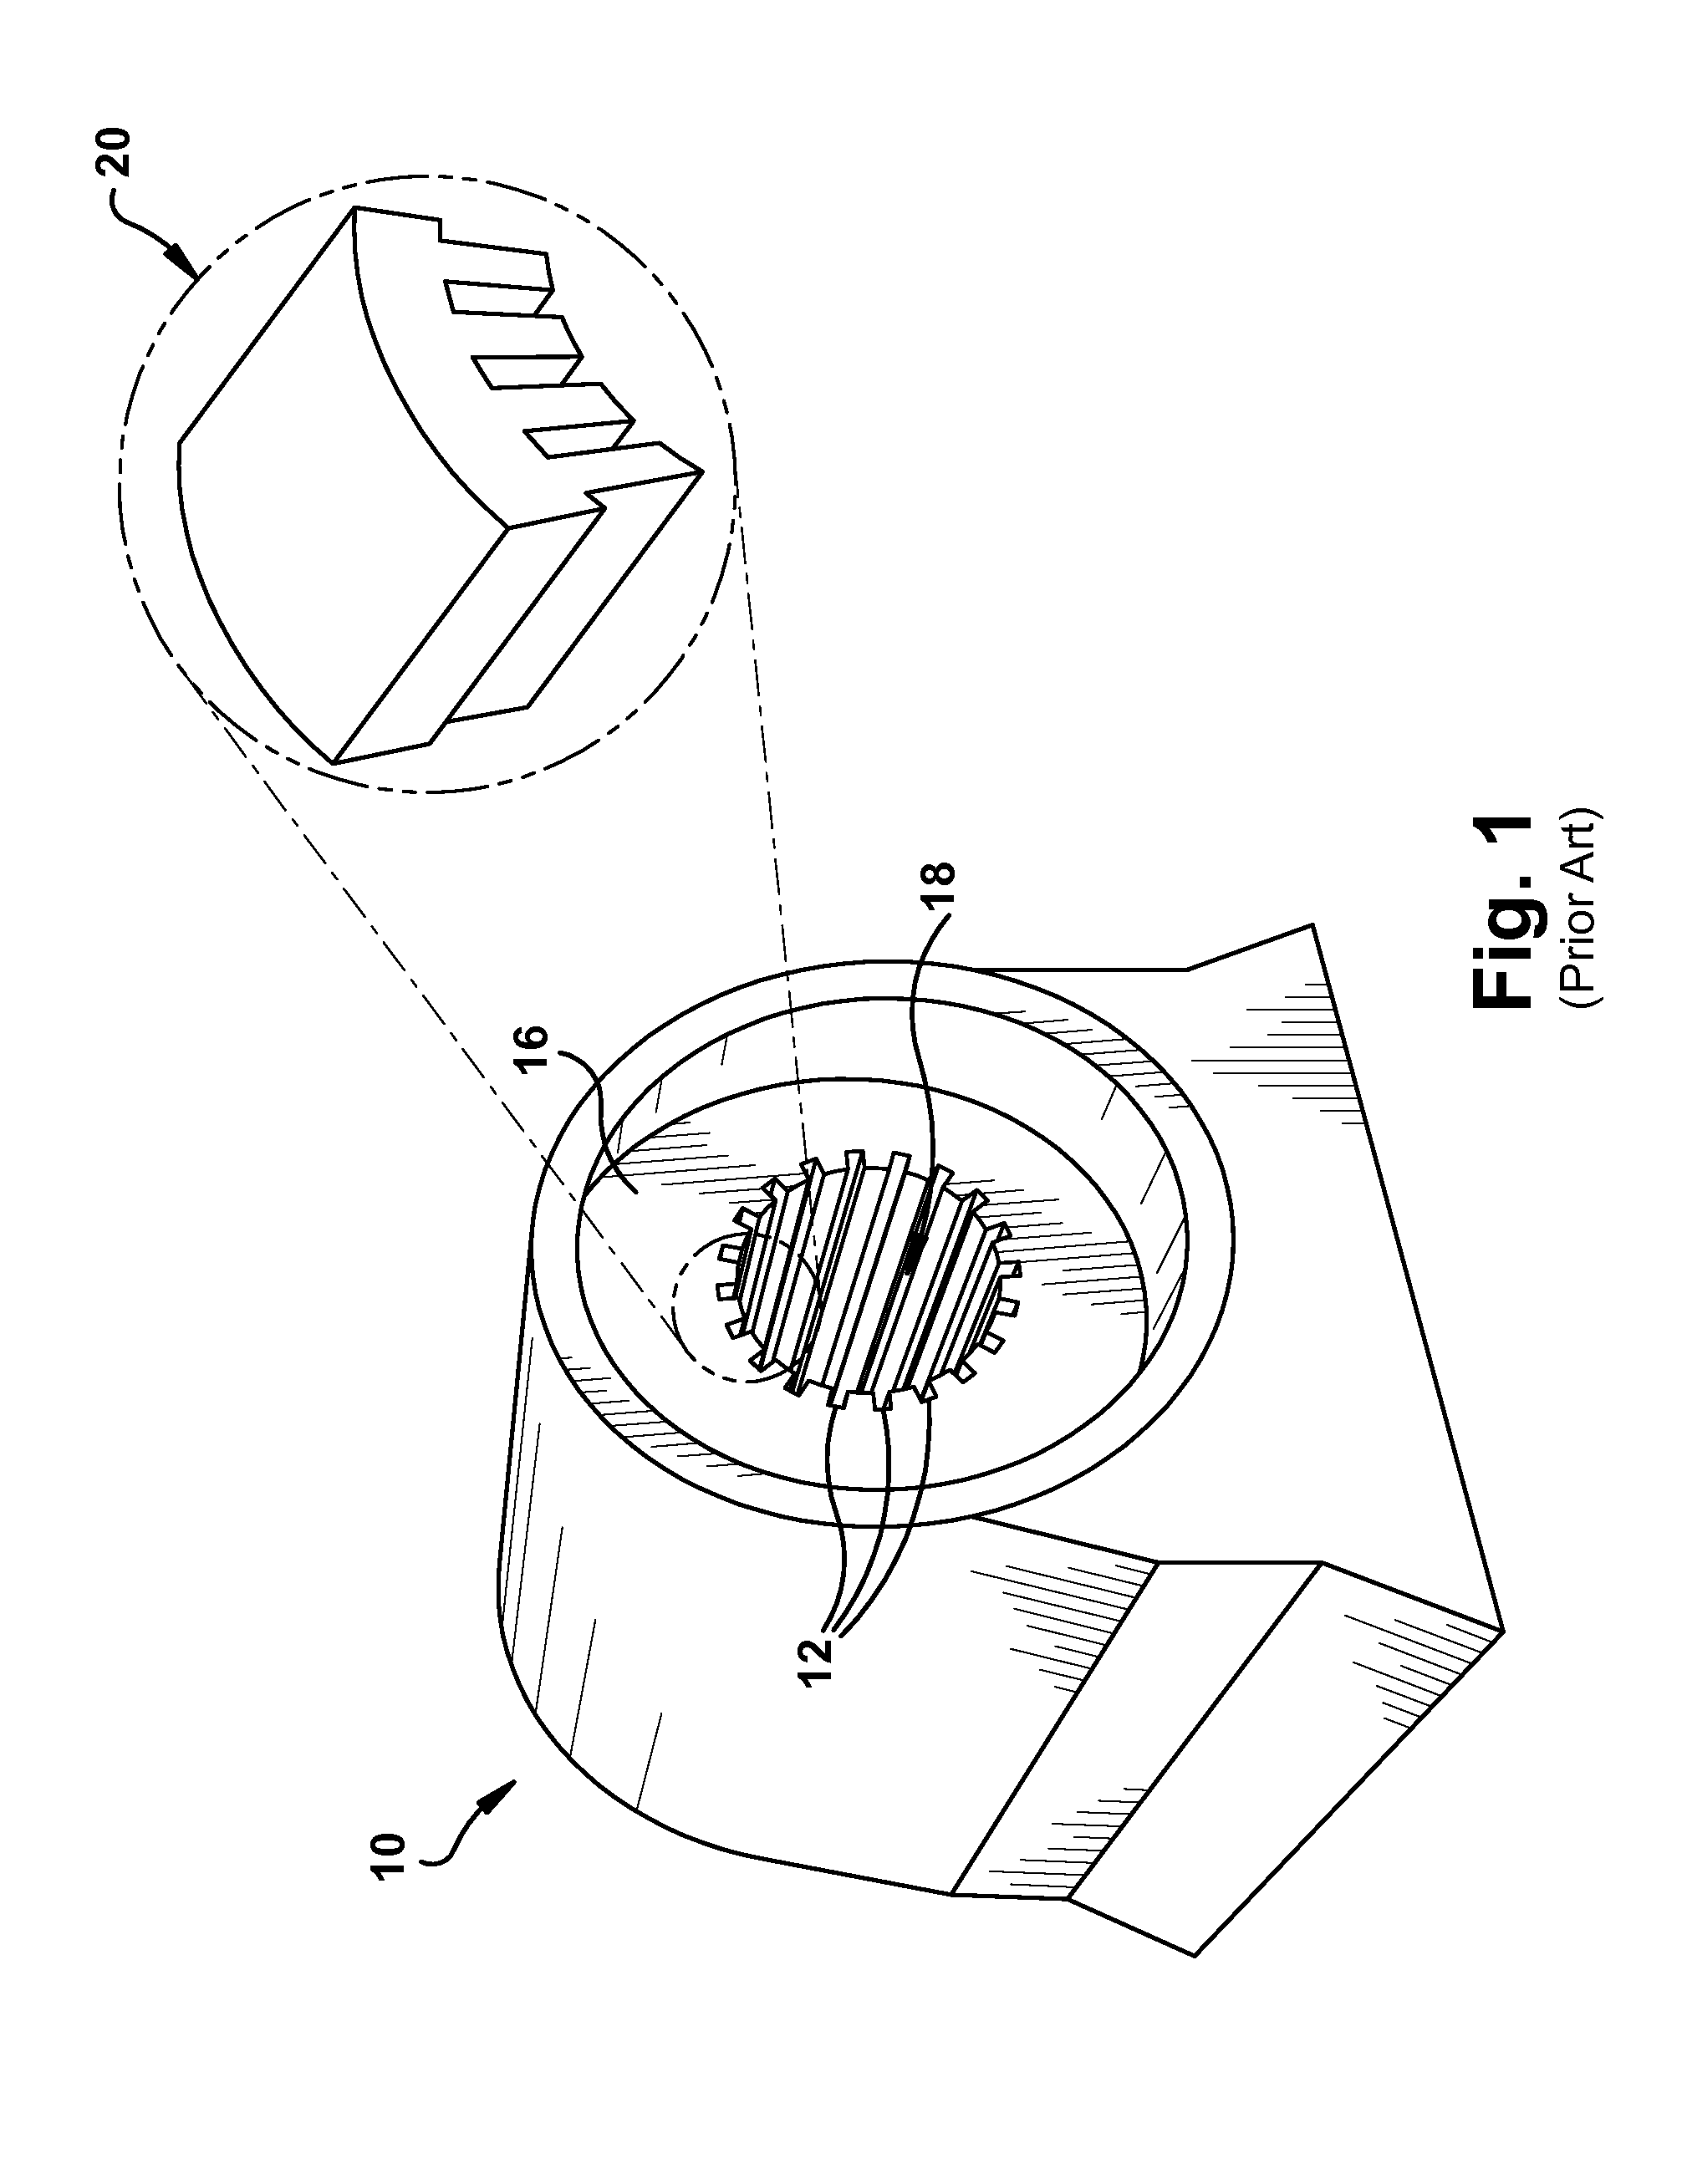 Retention assembly for stator bar using shim with stator wedge and related method